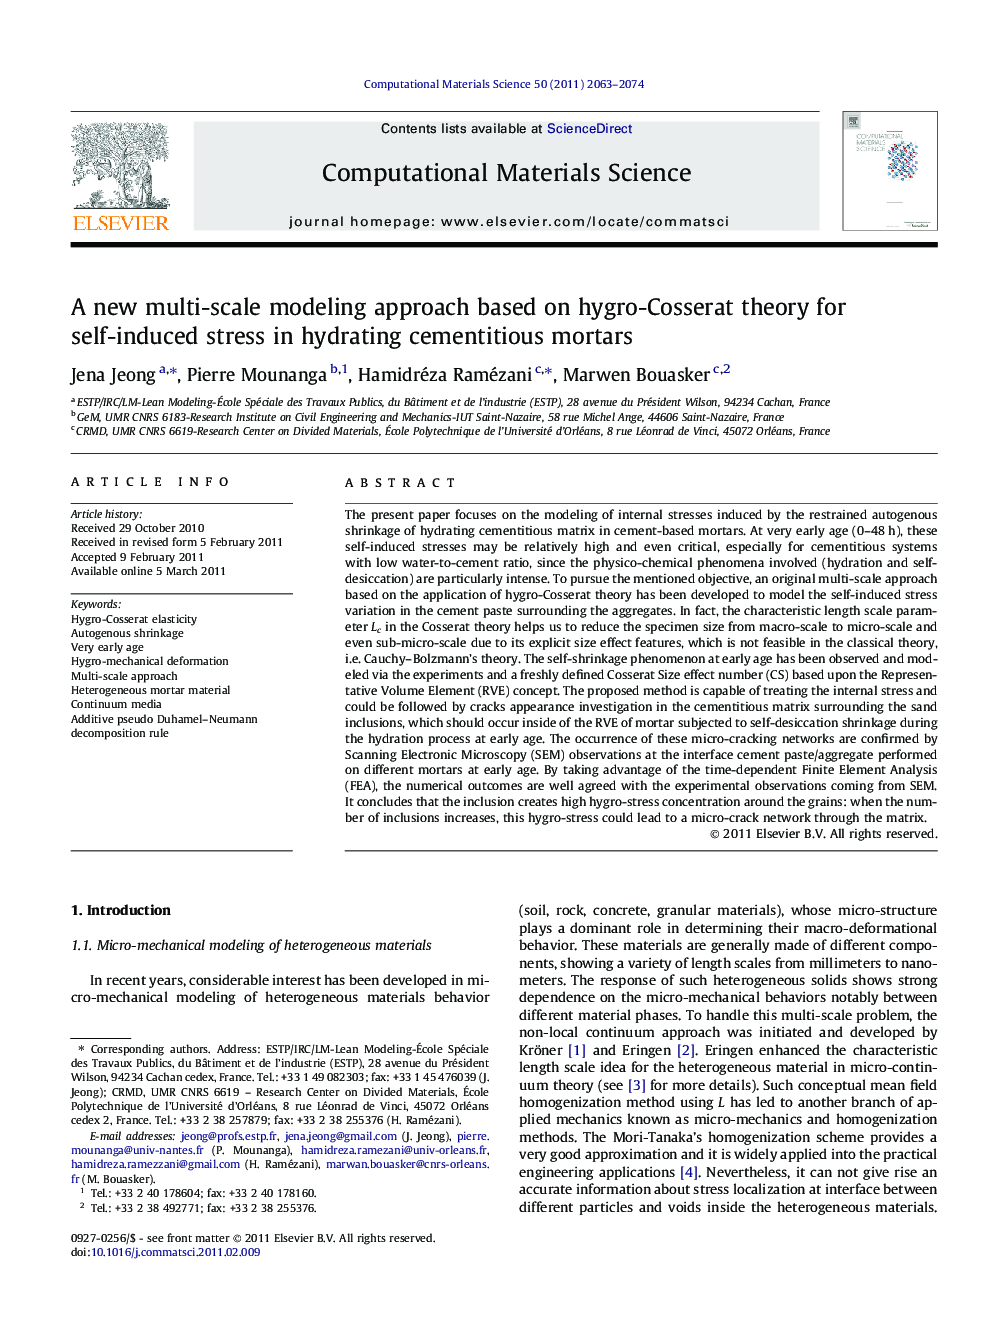 A new multi-scale modeling approach based on hygro-Cosserat theory for self-induced stress in hydrating cementitious mortars